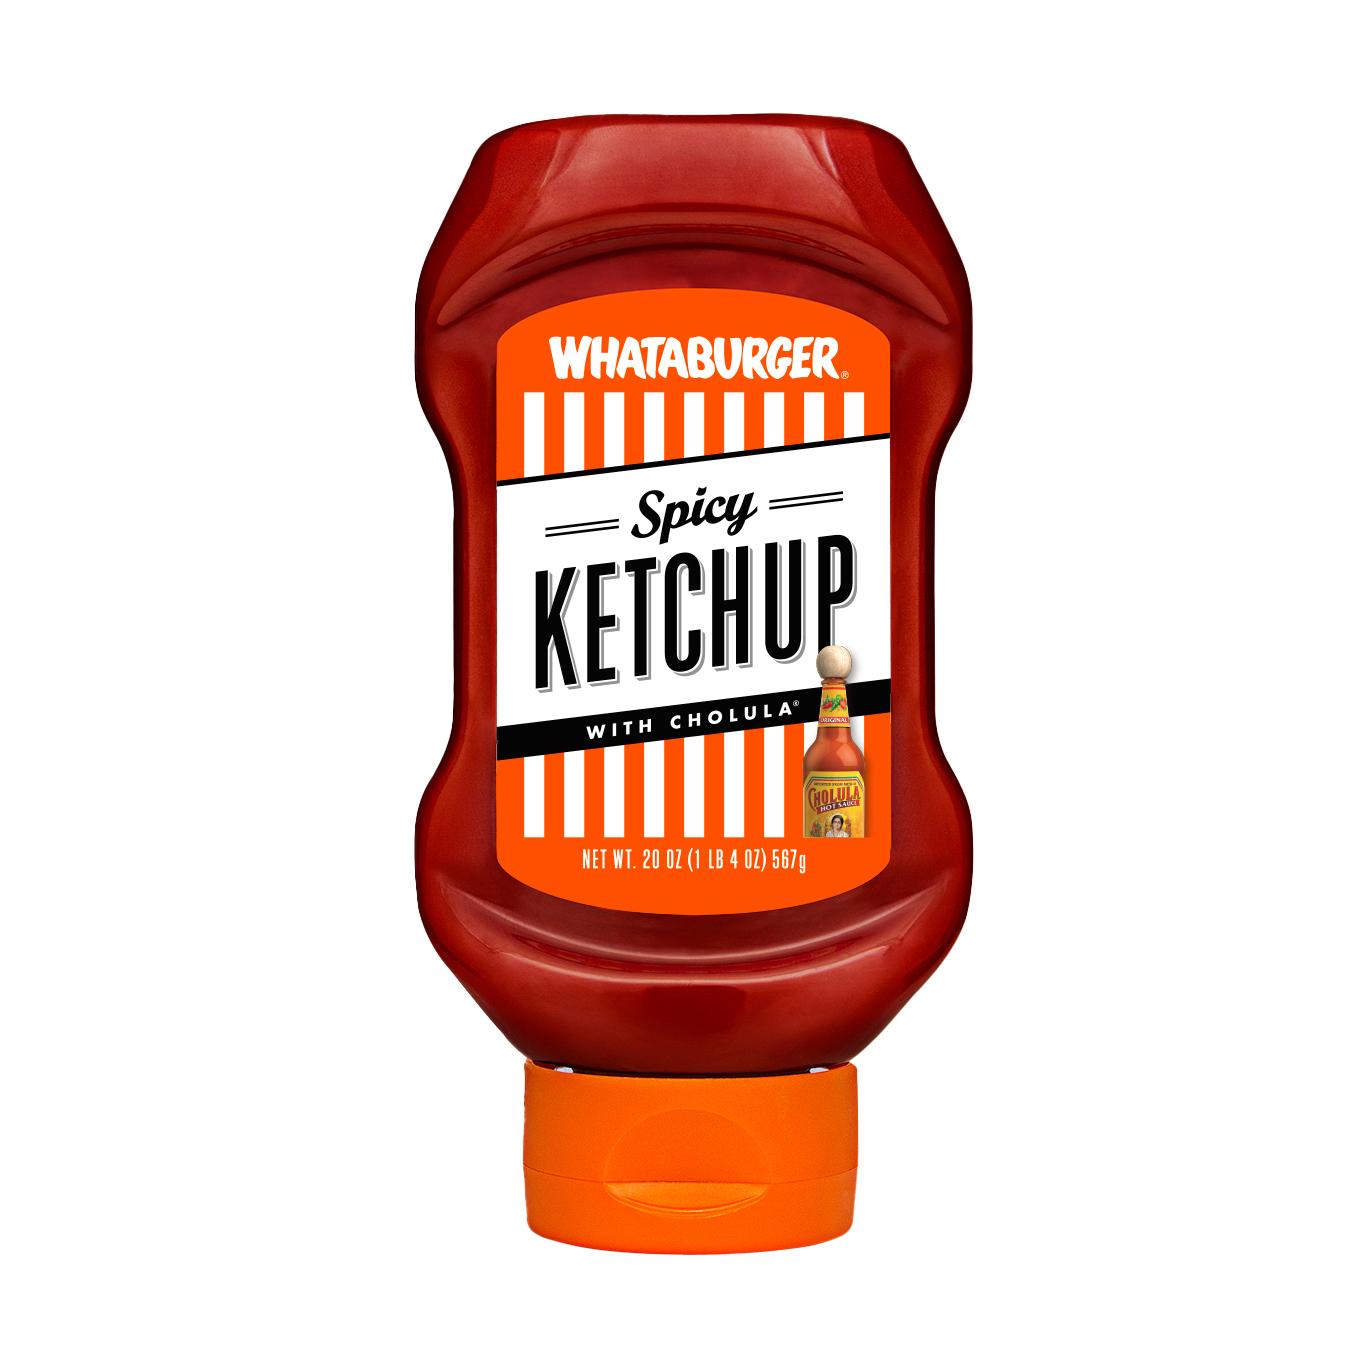 Whataburger Spicy Ketchup with Cholula; image 1 of 2